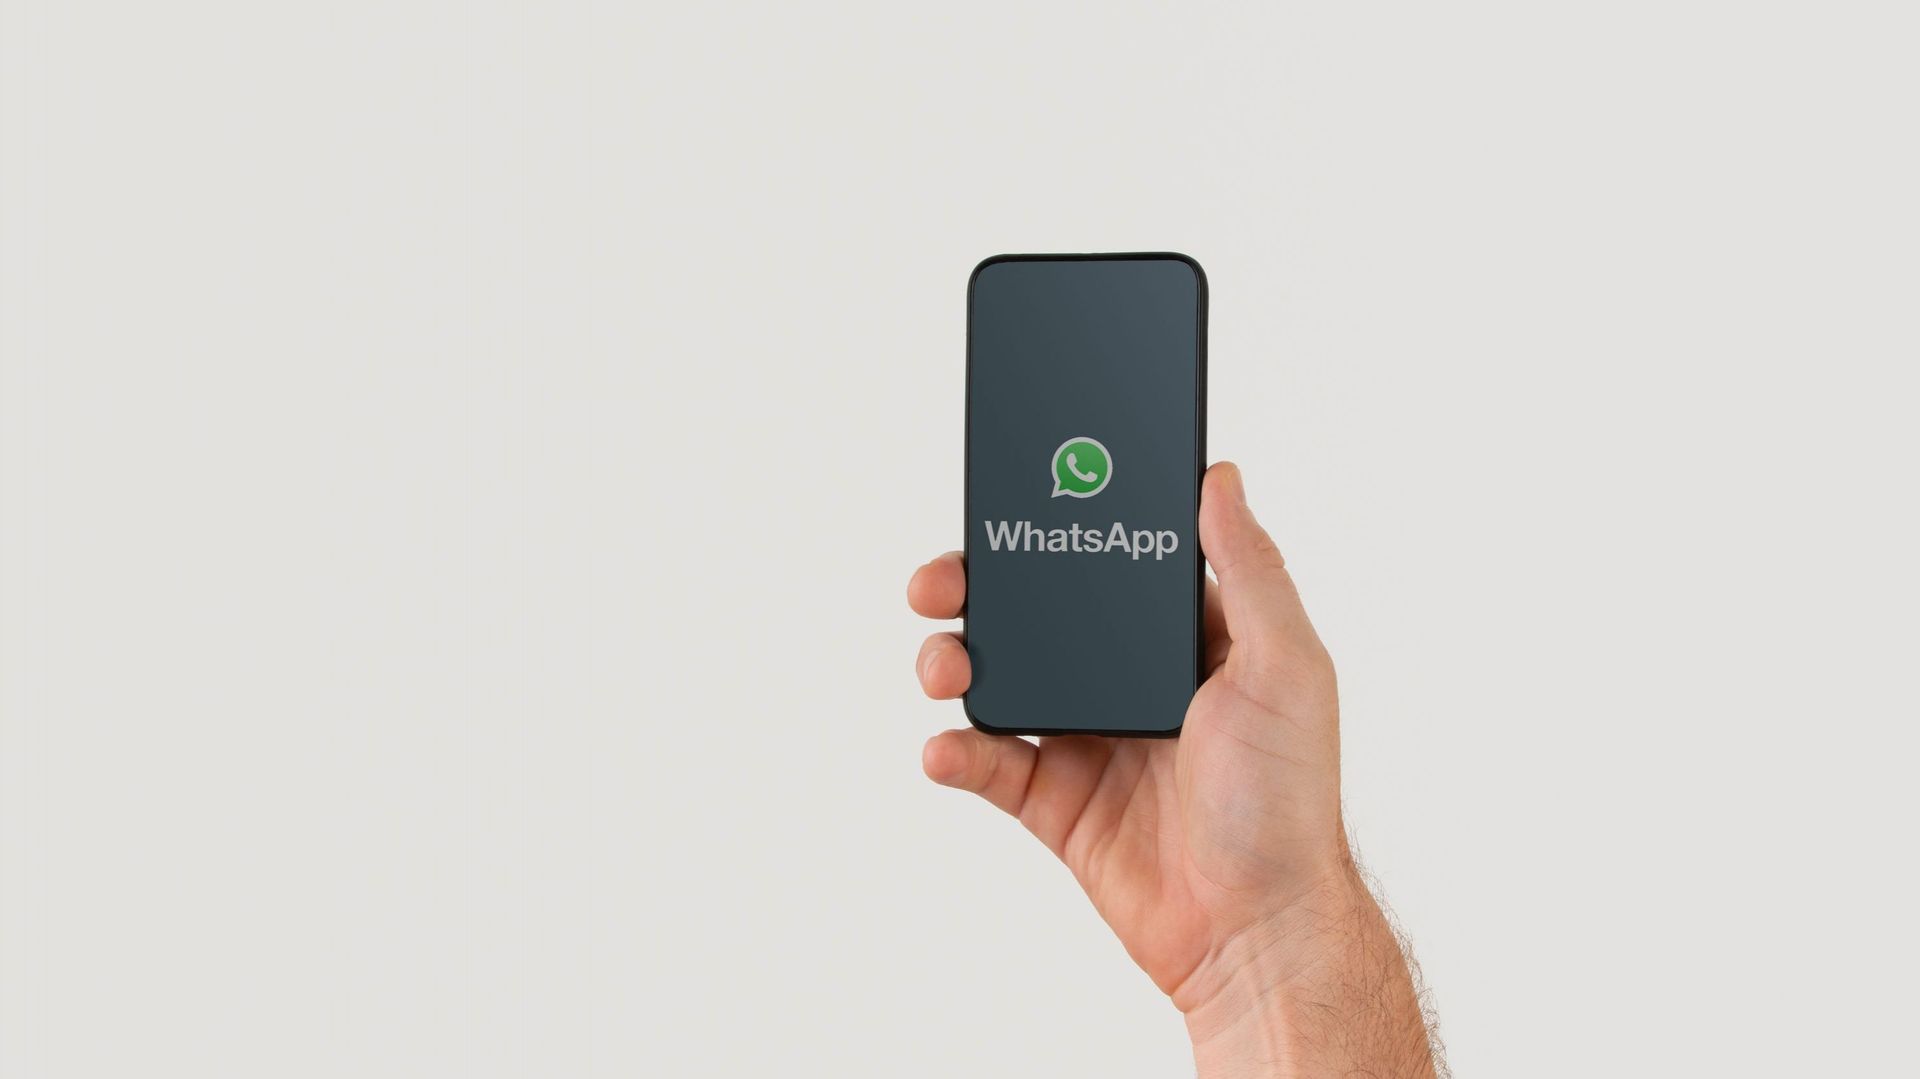 Hand holding smart phone with popular online text / call application &#34 ; WhatsApp&#34 ; logo on screen. Illustrative editorial image with copy space for text.